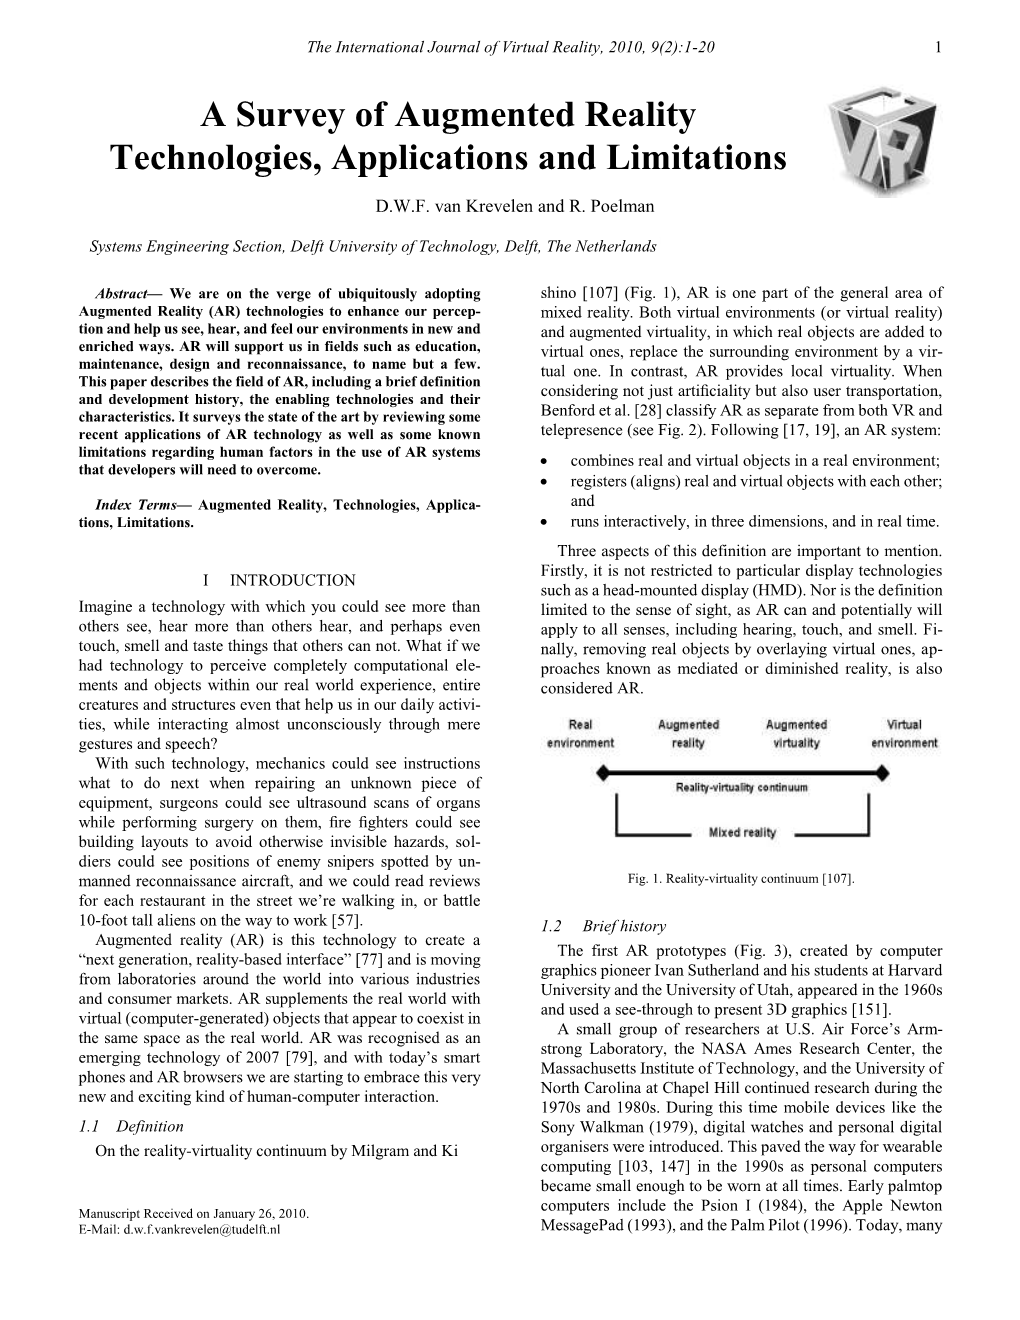 A Survey of Augmented Reality Technologies, Applications and Limitations